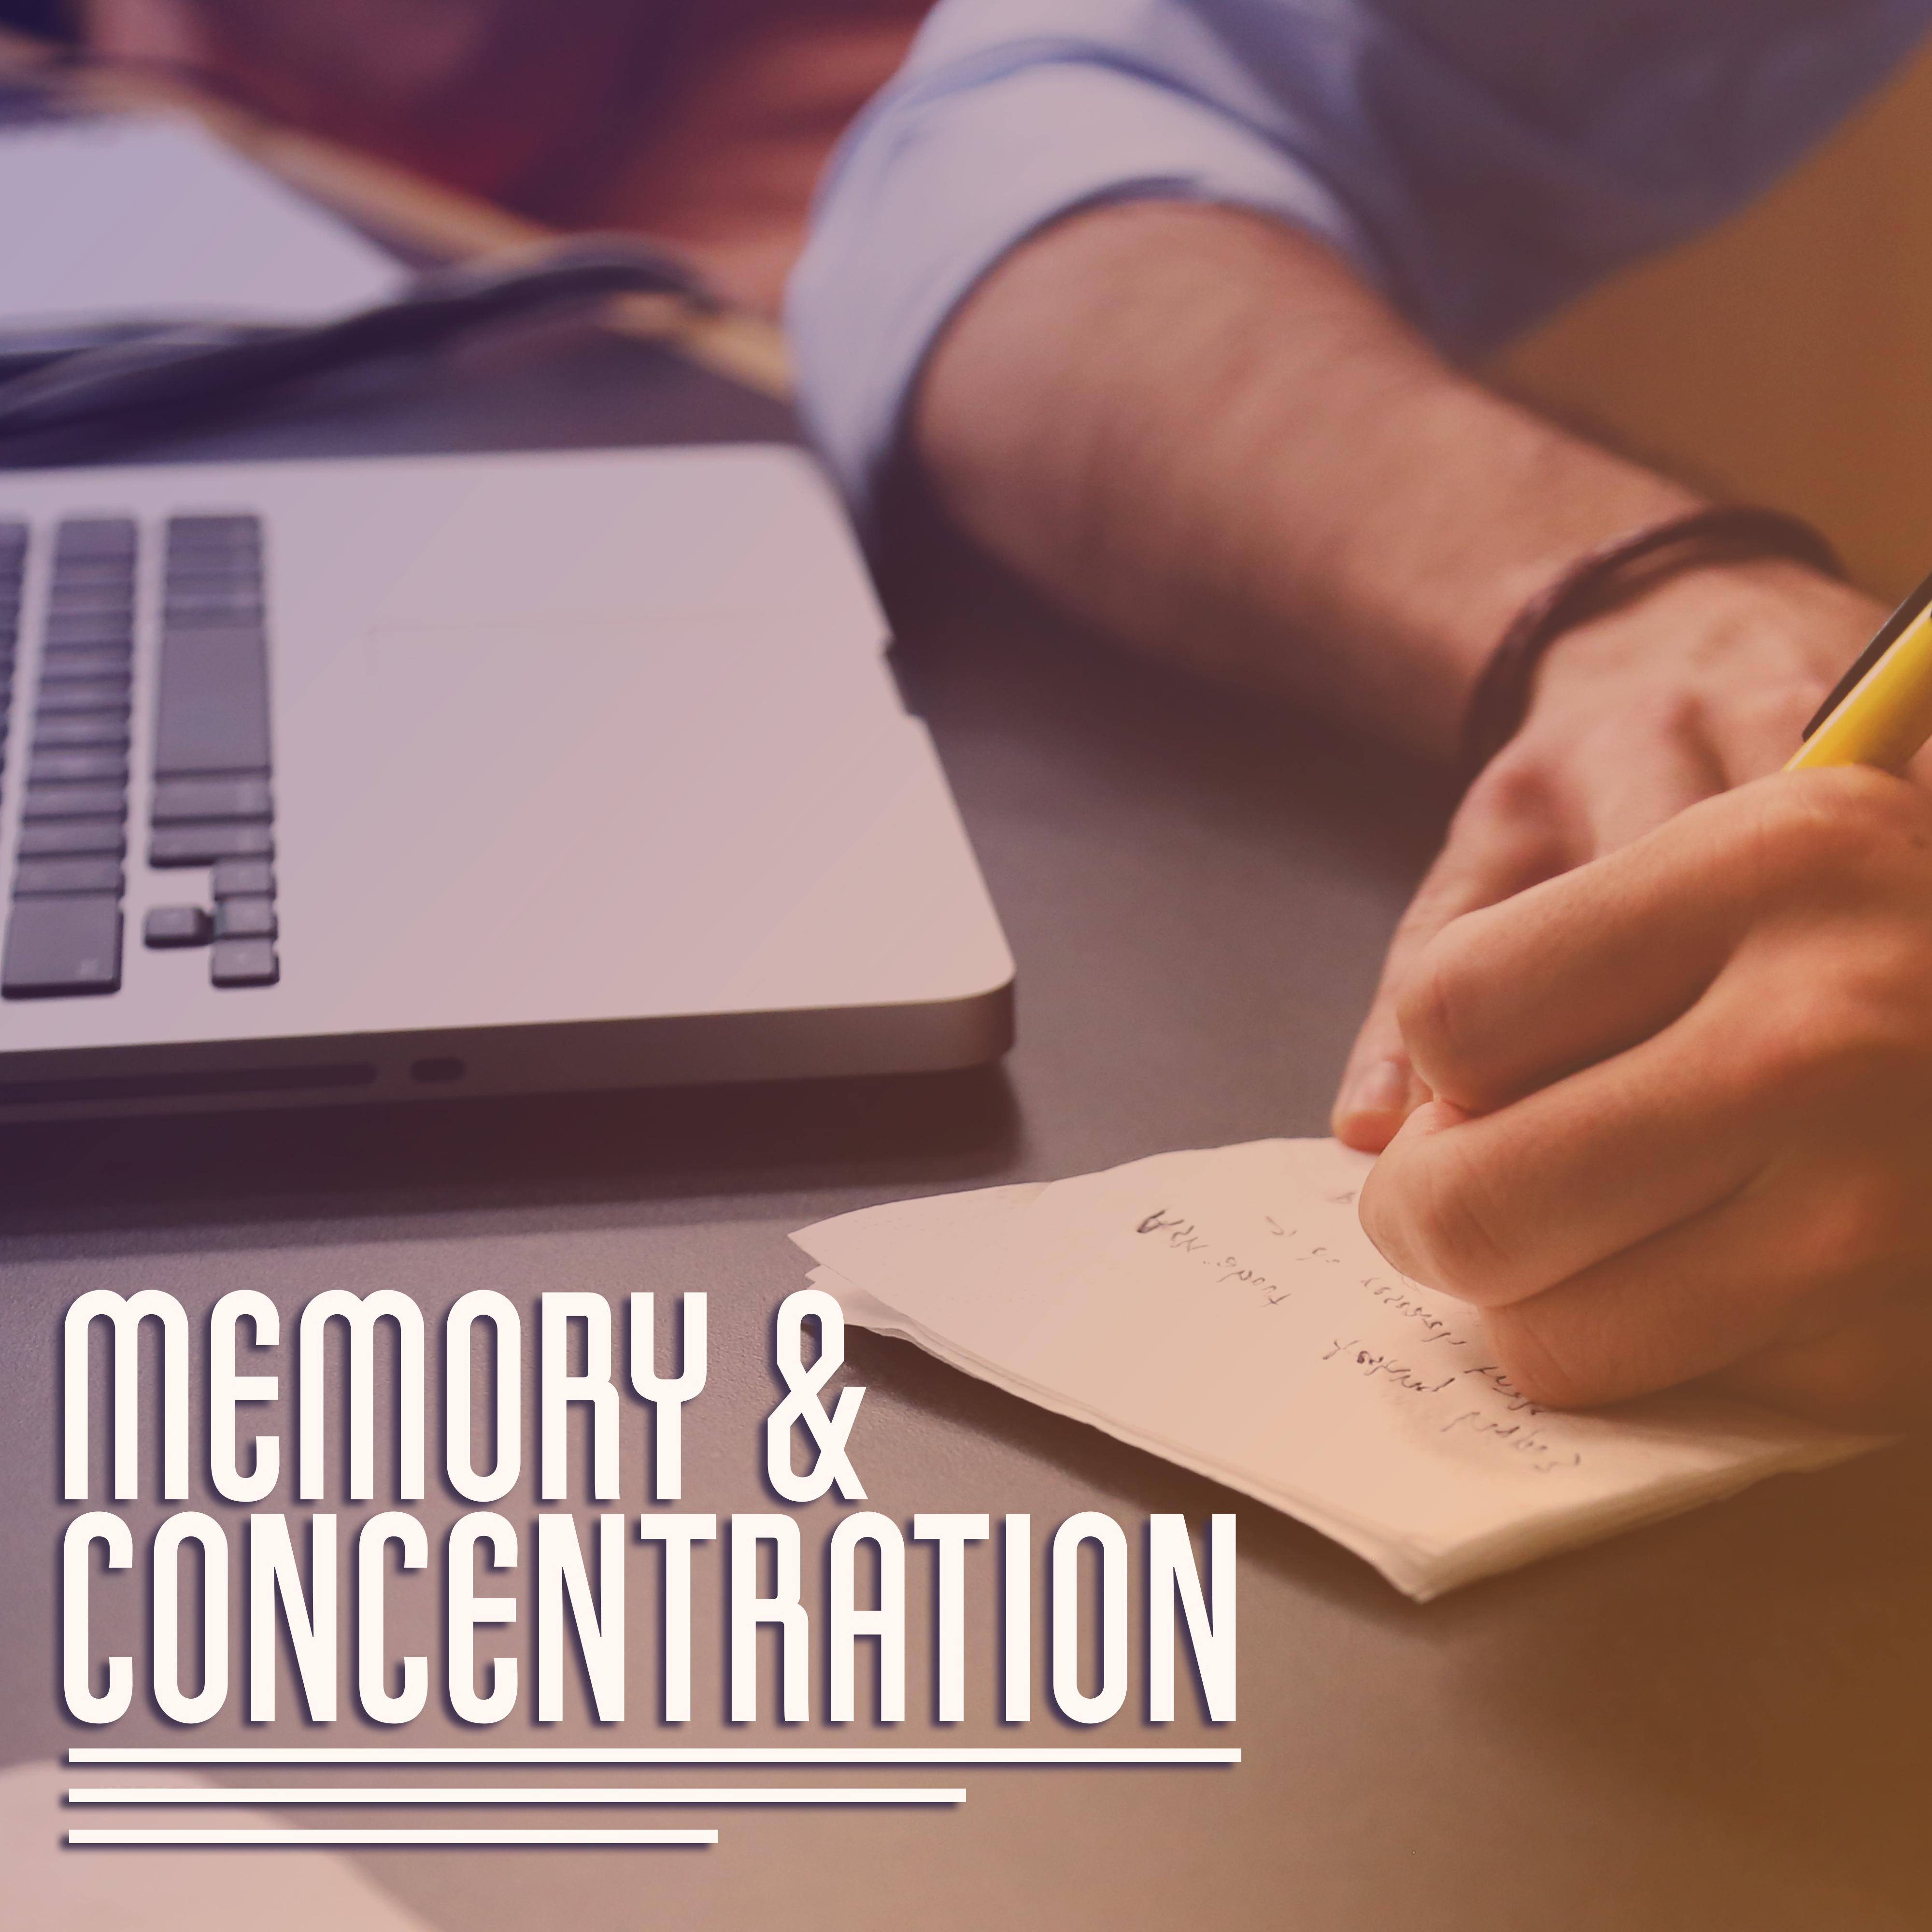 Memory & Concentration – Instrumental Music for Study, Brain Power, Effective Learning, Classical Sounds Relieve Stress